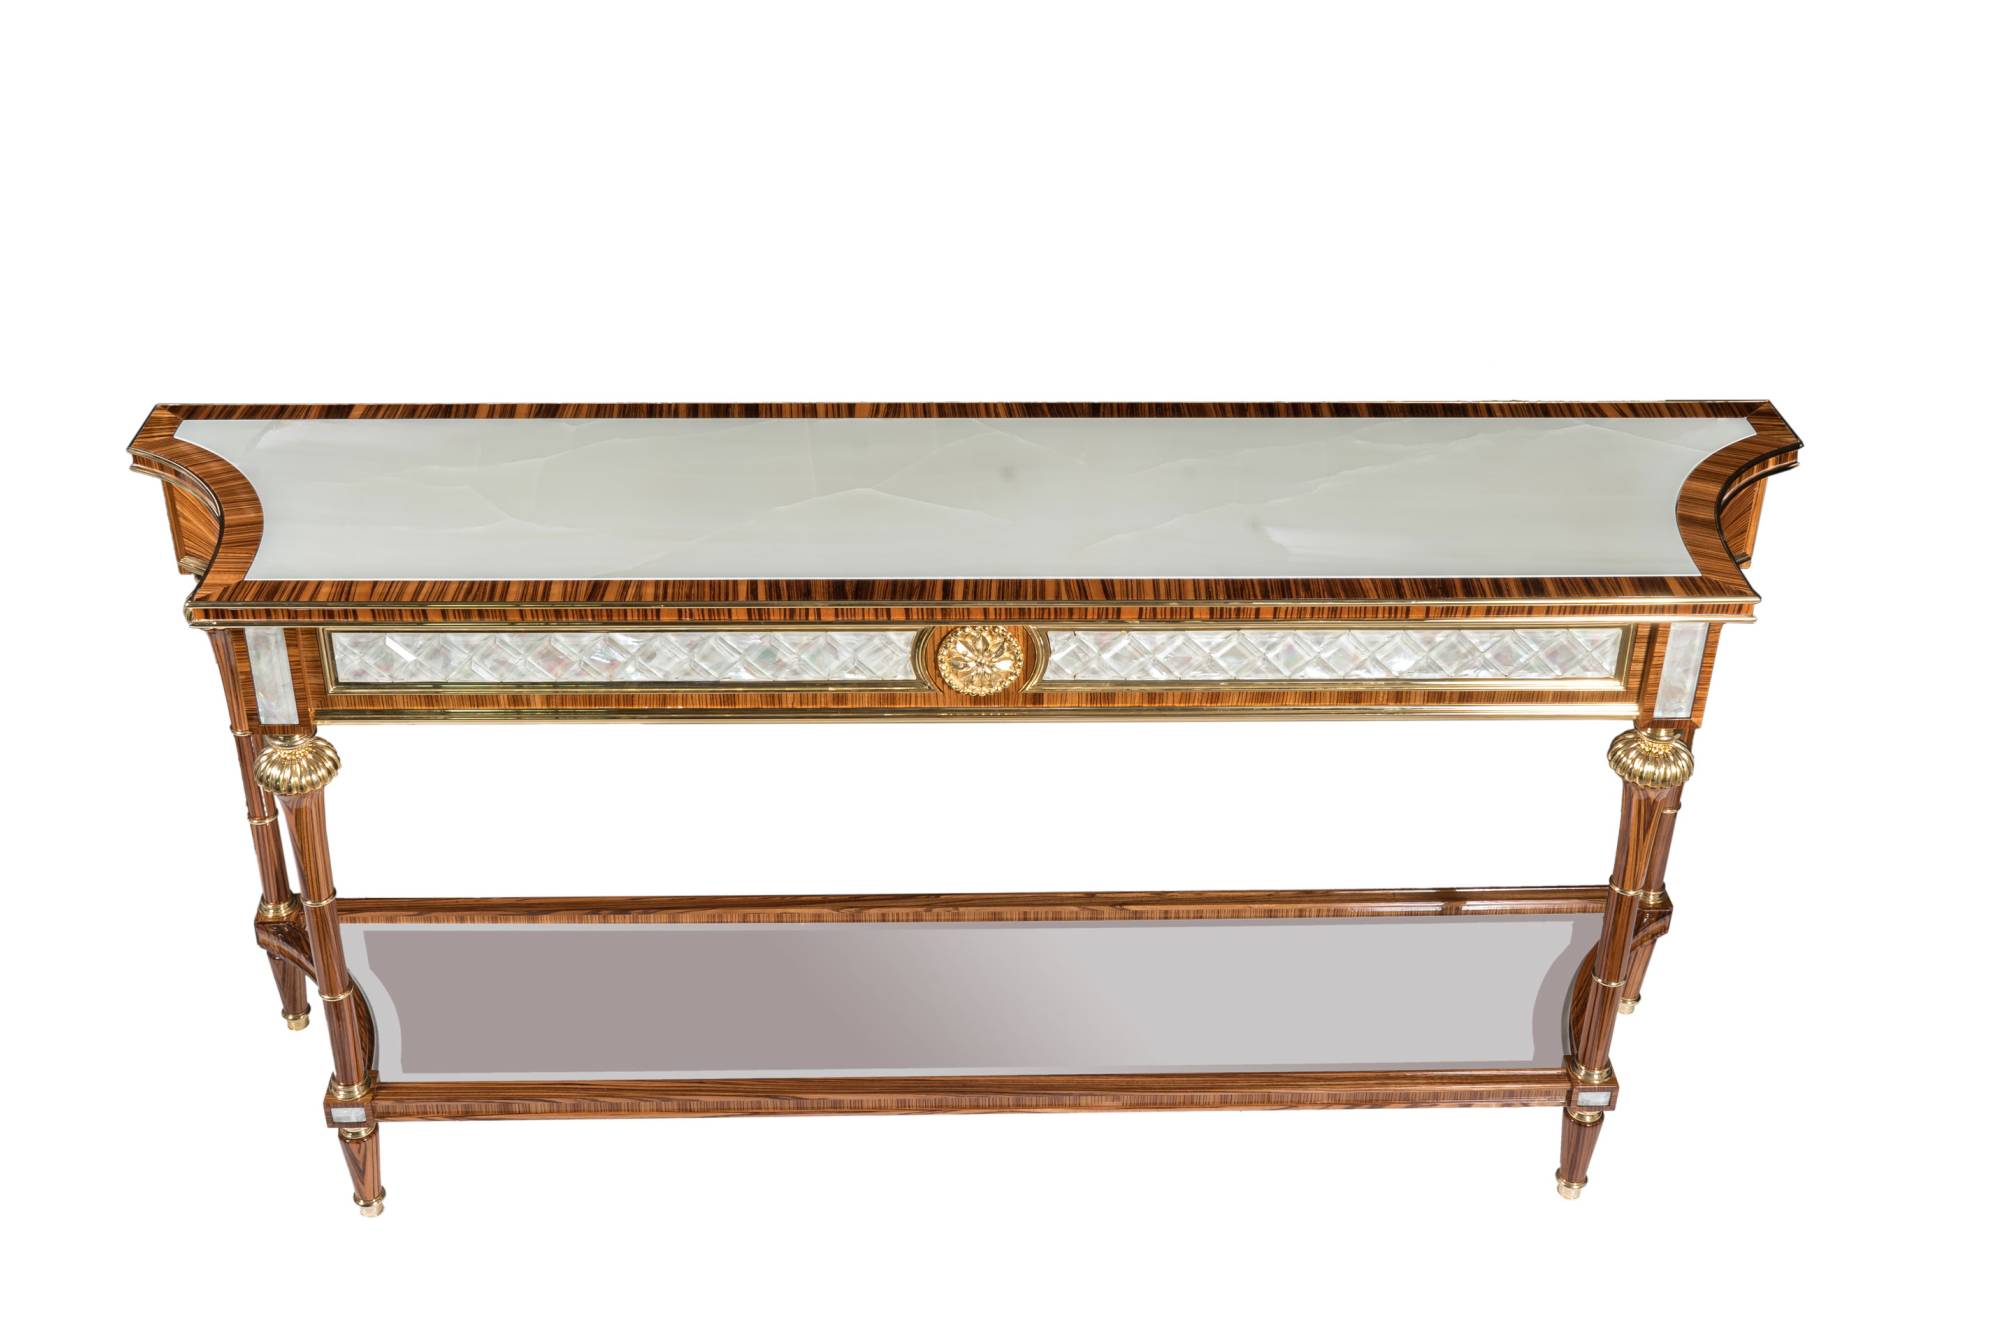 ART. 2081 – The elegance of luxury classic Console made in Italy by C.G. Capelletti.